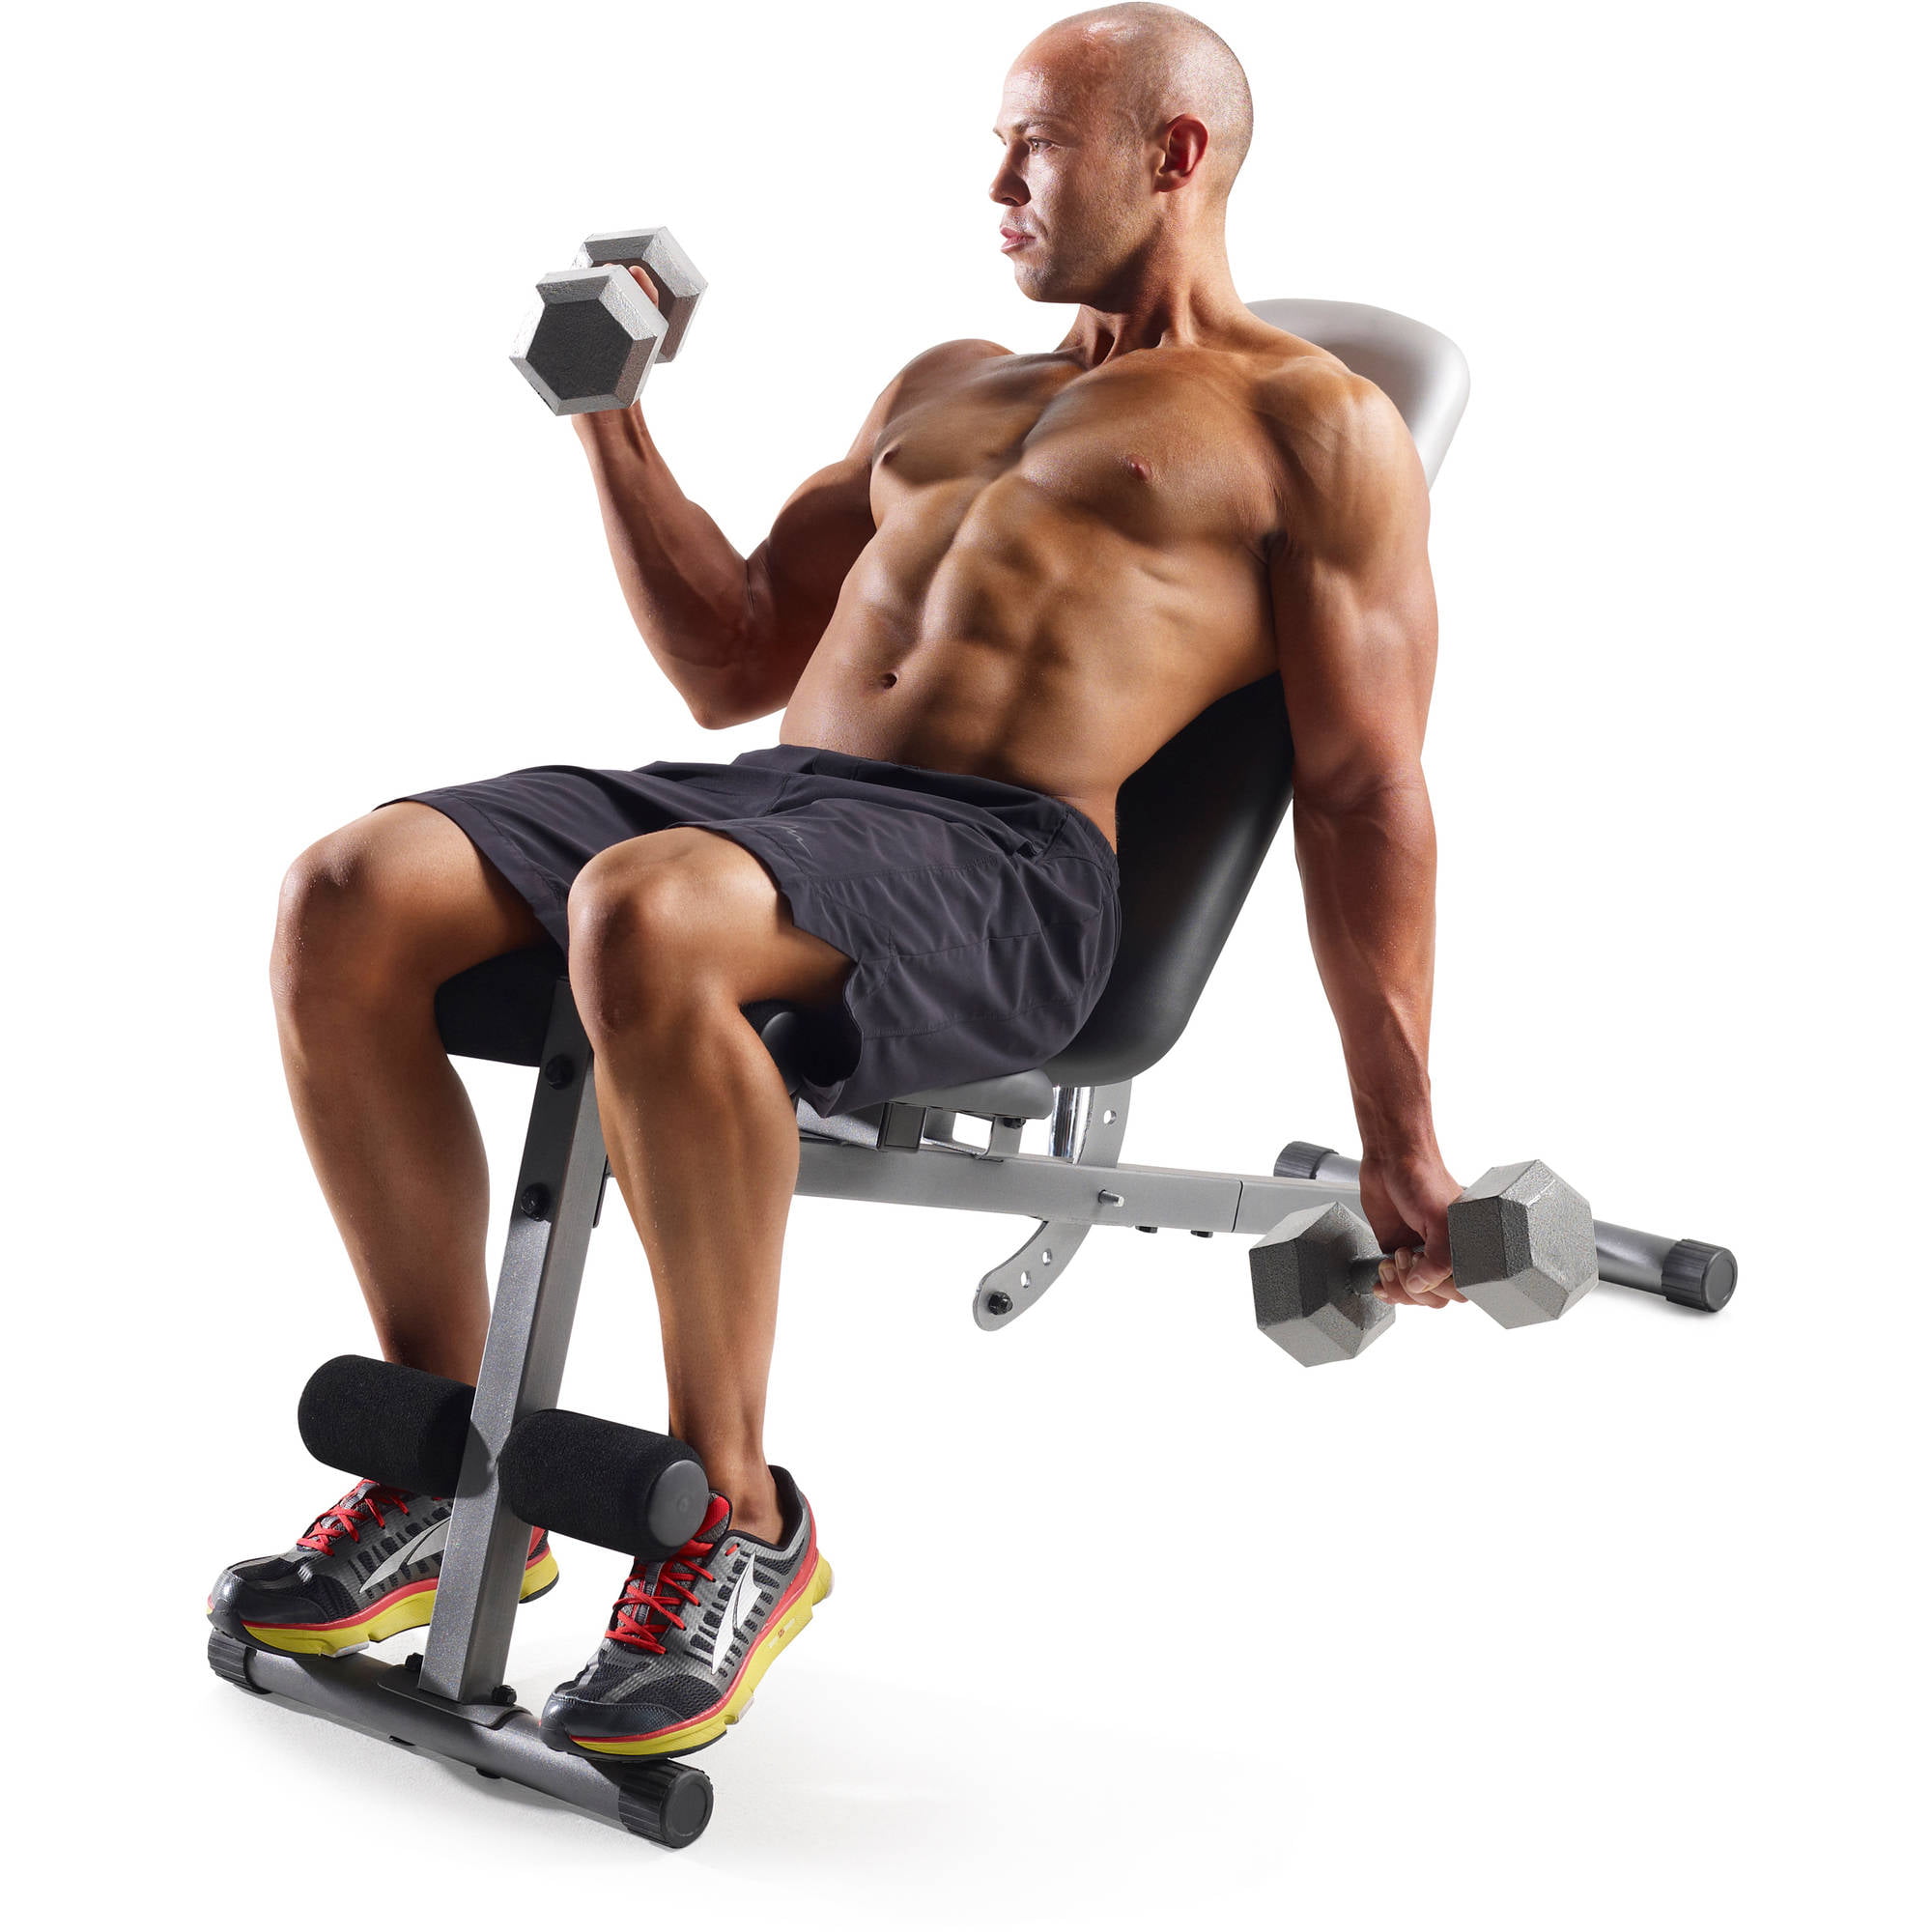 What exercises can i do with a set of dumbbells and a small adjustable bench at home?